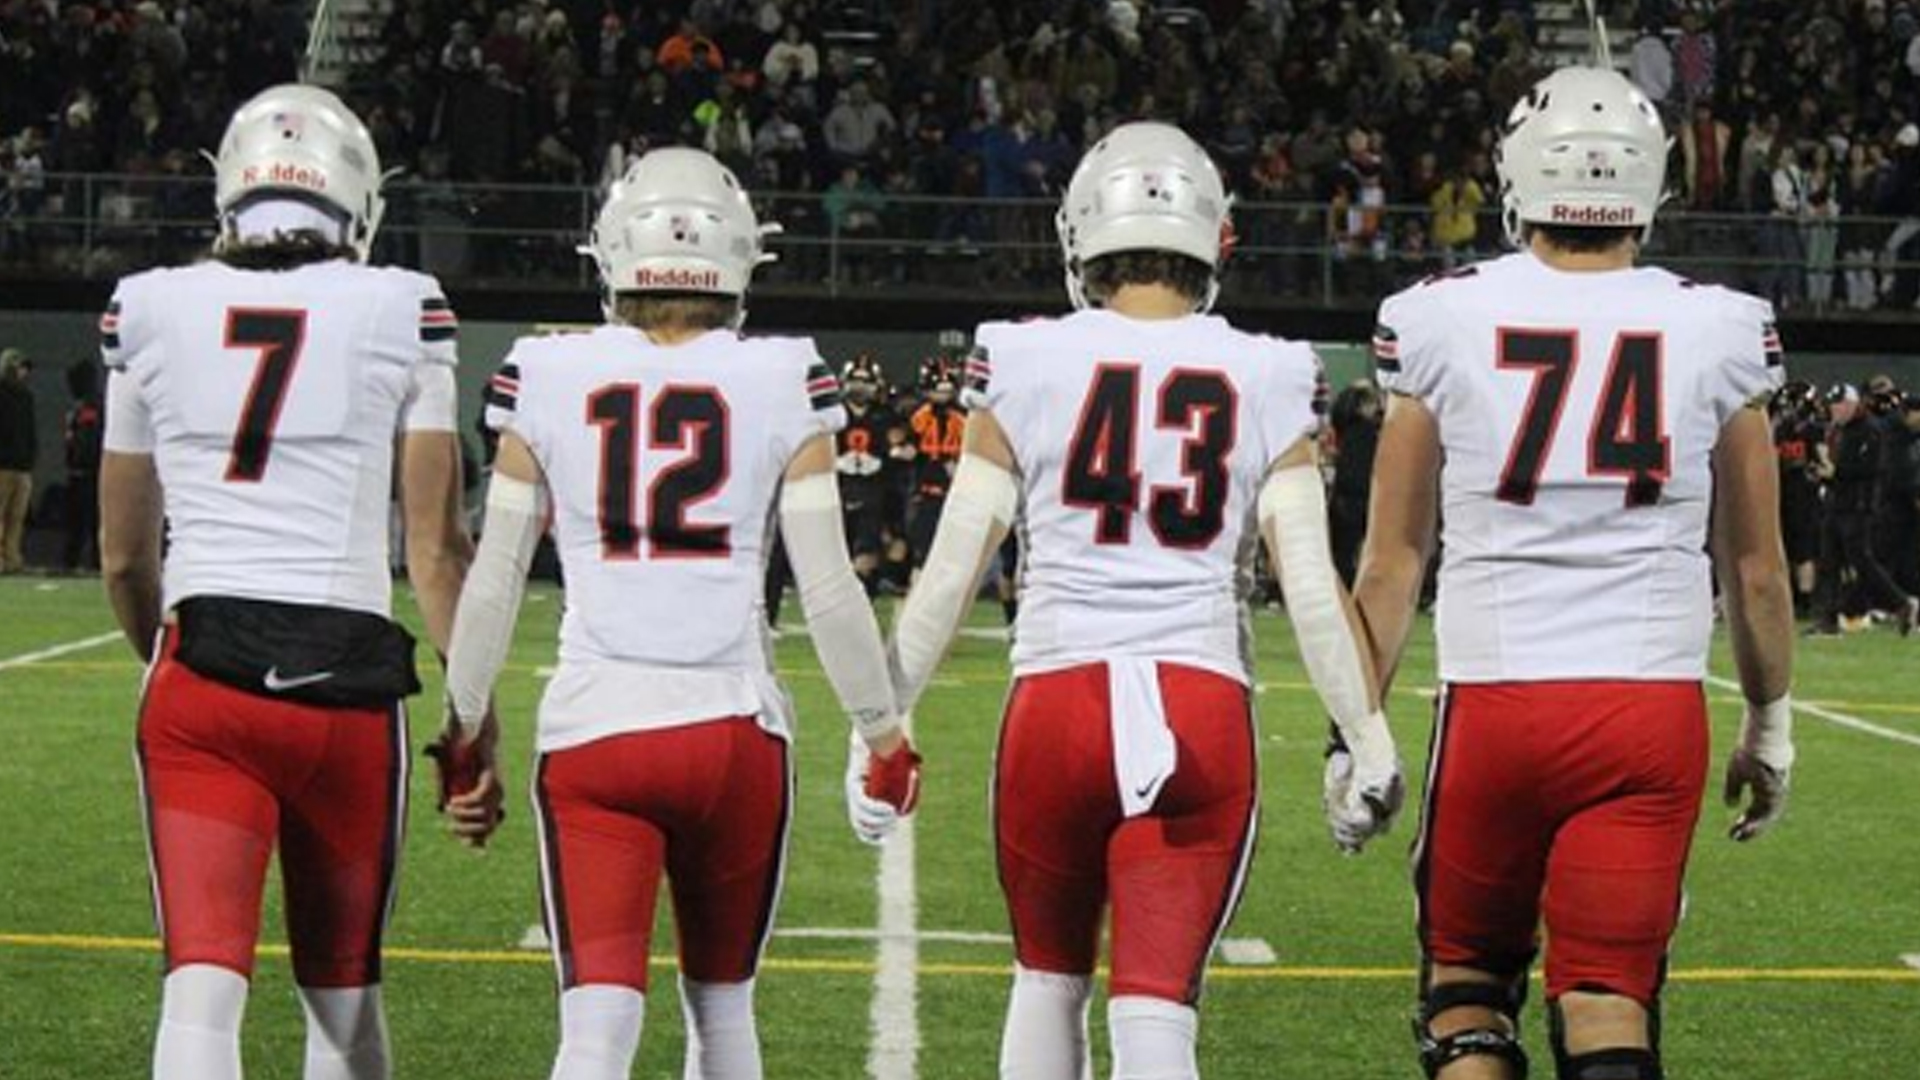 Camas Carson Osmus, Nikko Speer and Trenton Swanson Named To SBLive All-State Team